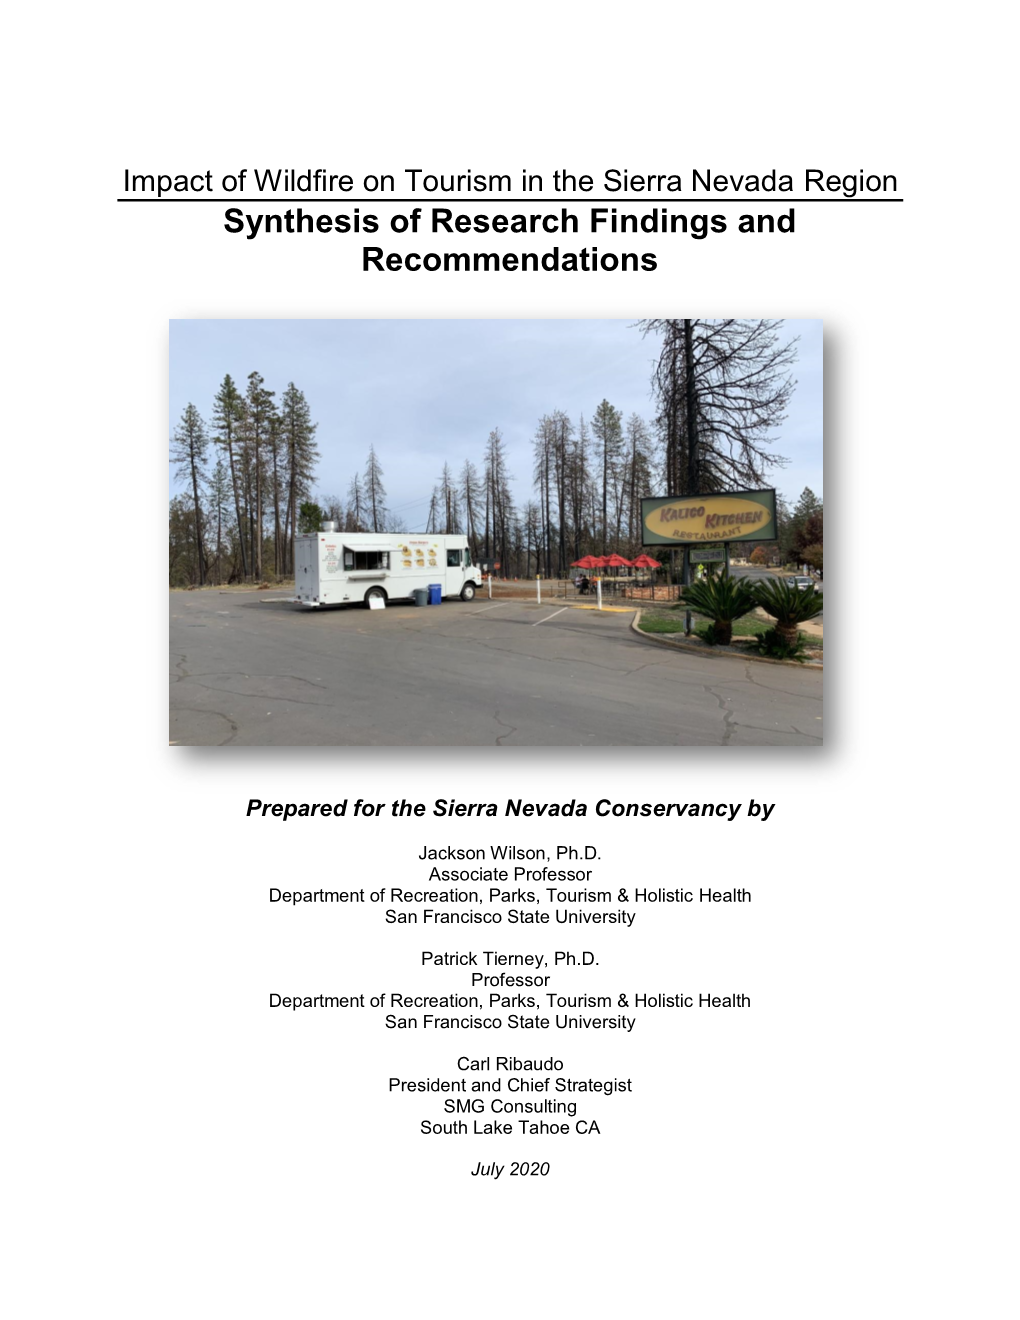 Impact of Wildfire on Tourism in the Sierra Nevada Region Synthesis of Research Findings and Recommendations